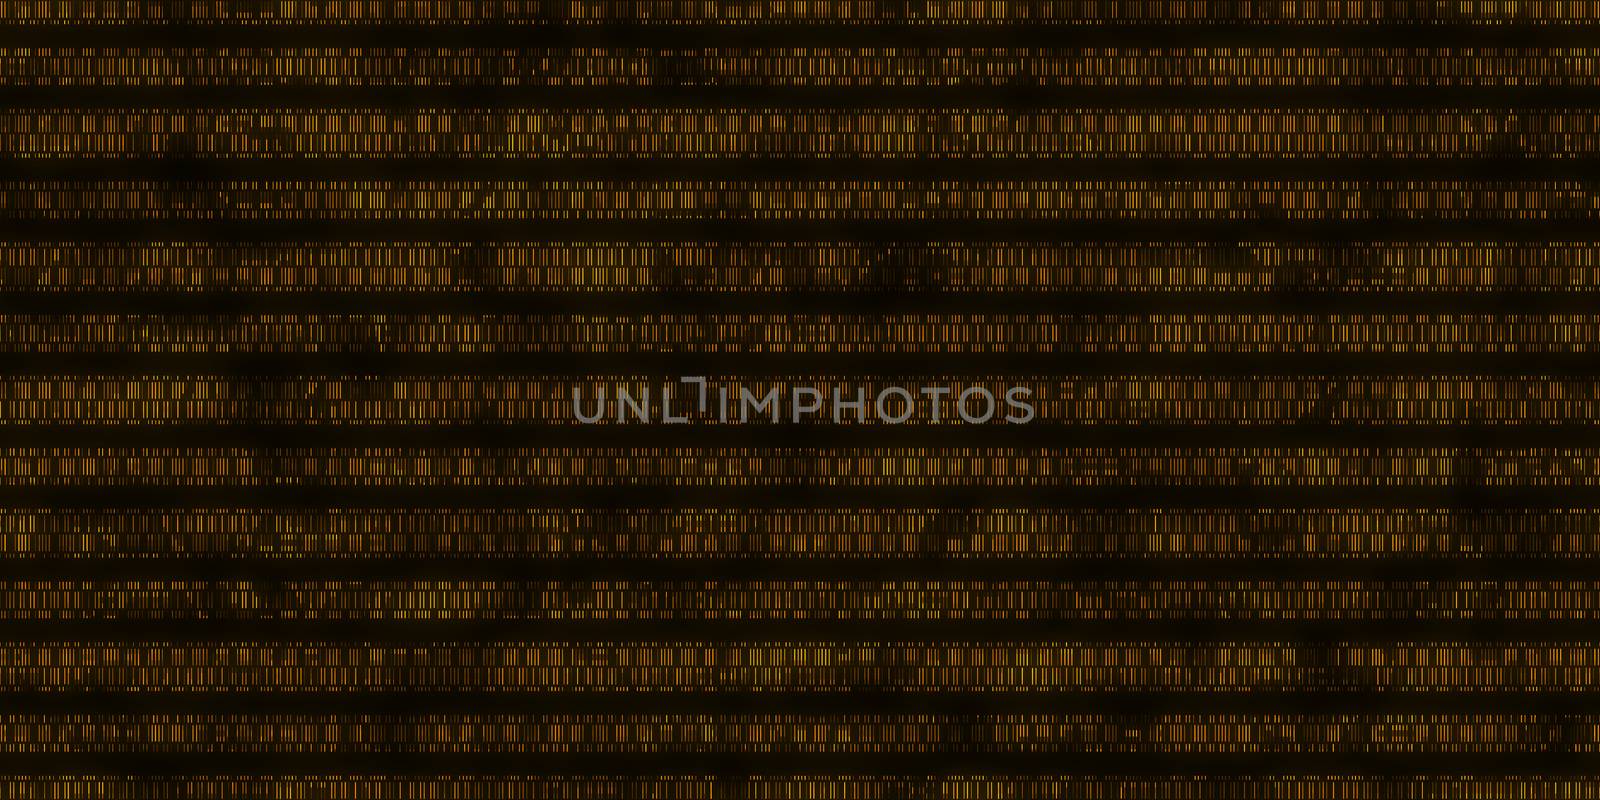 Orange Dna Data Code Background. Seamless Science Dna Data Code Output Sequence. Human Individuality Code Backdrops.